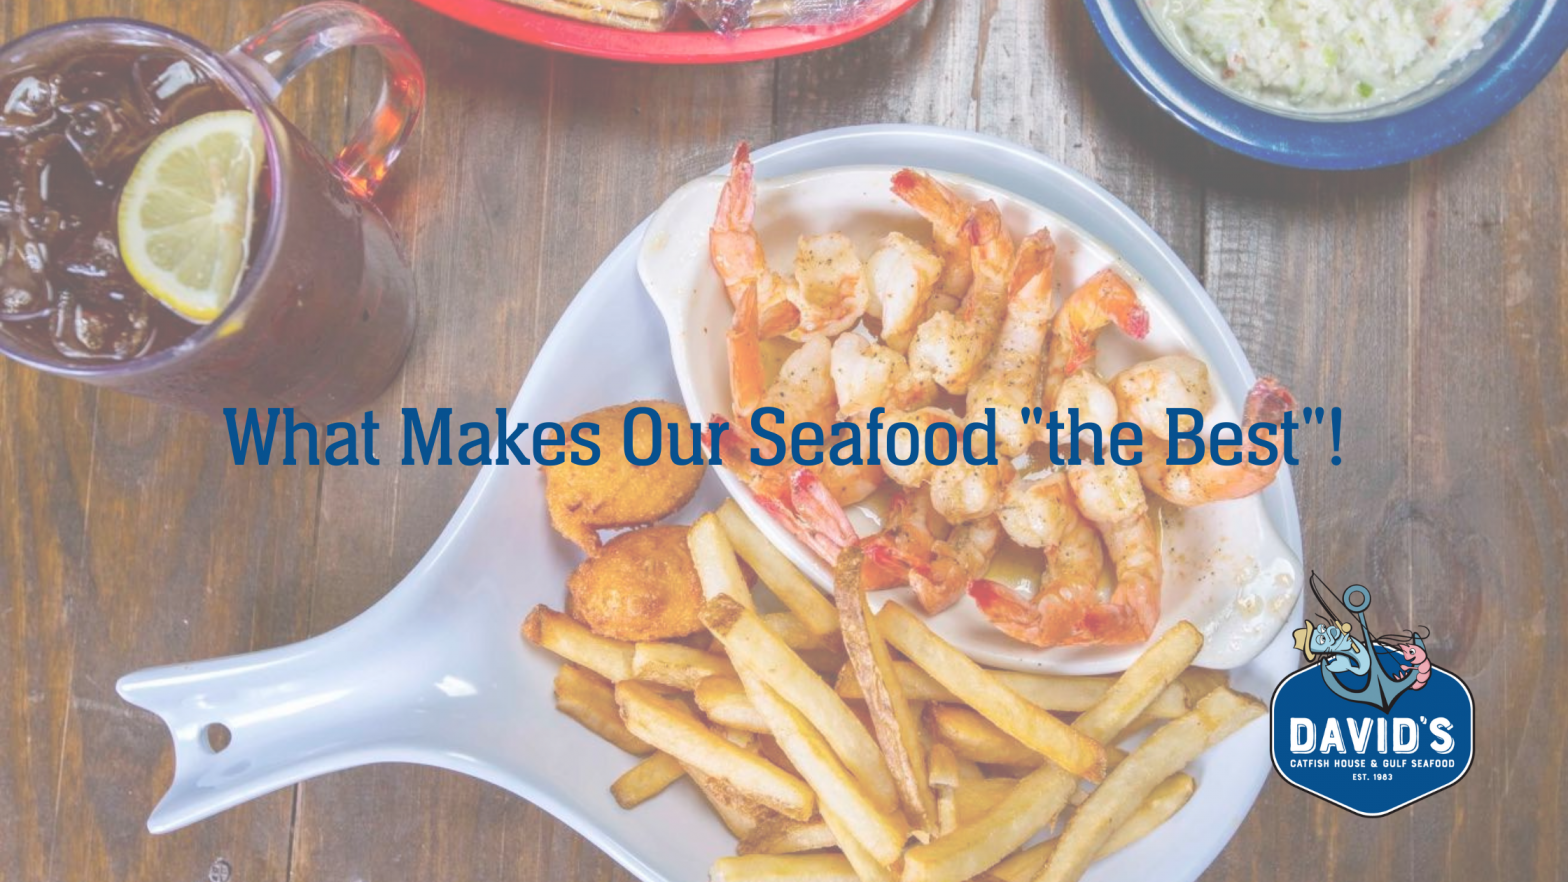 What Makes Our Seafood "The Best"?